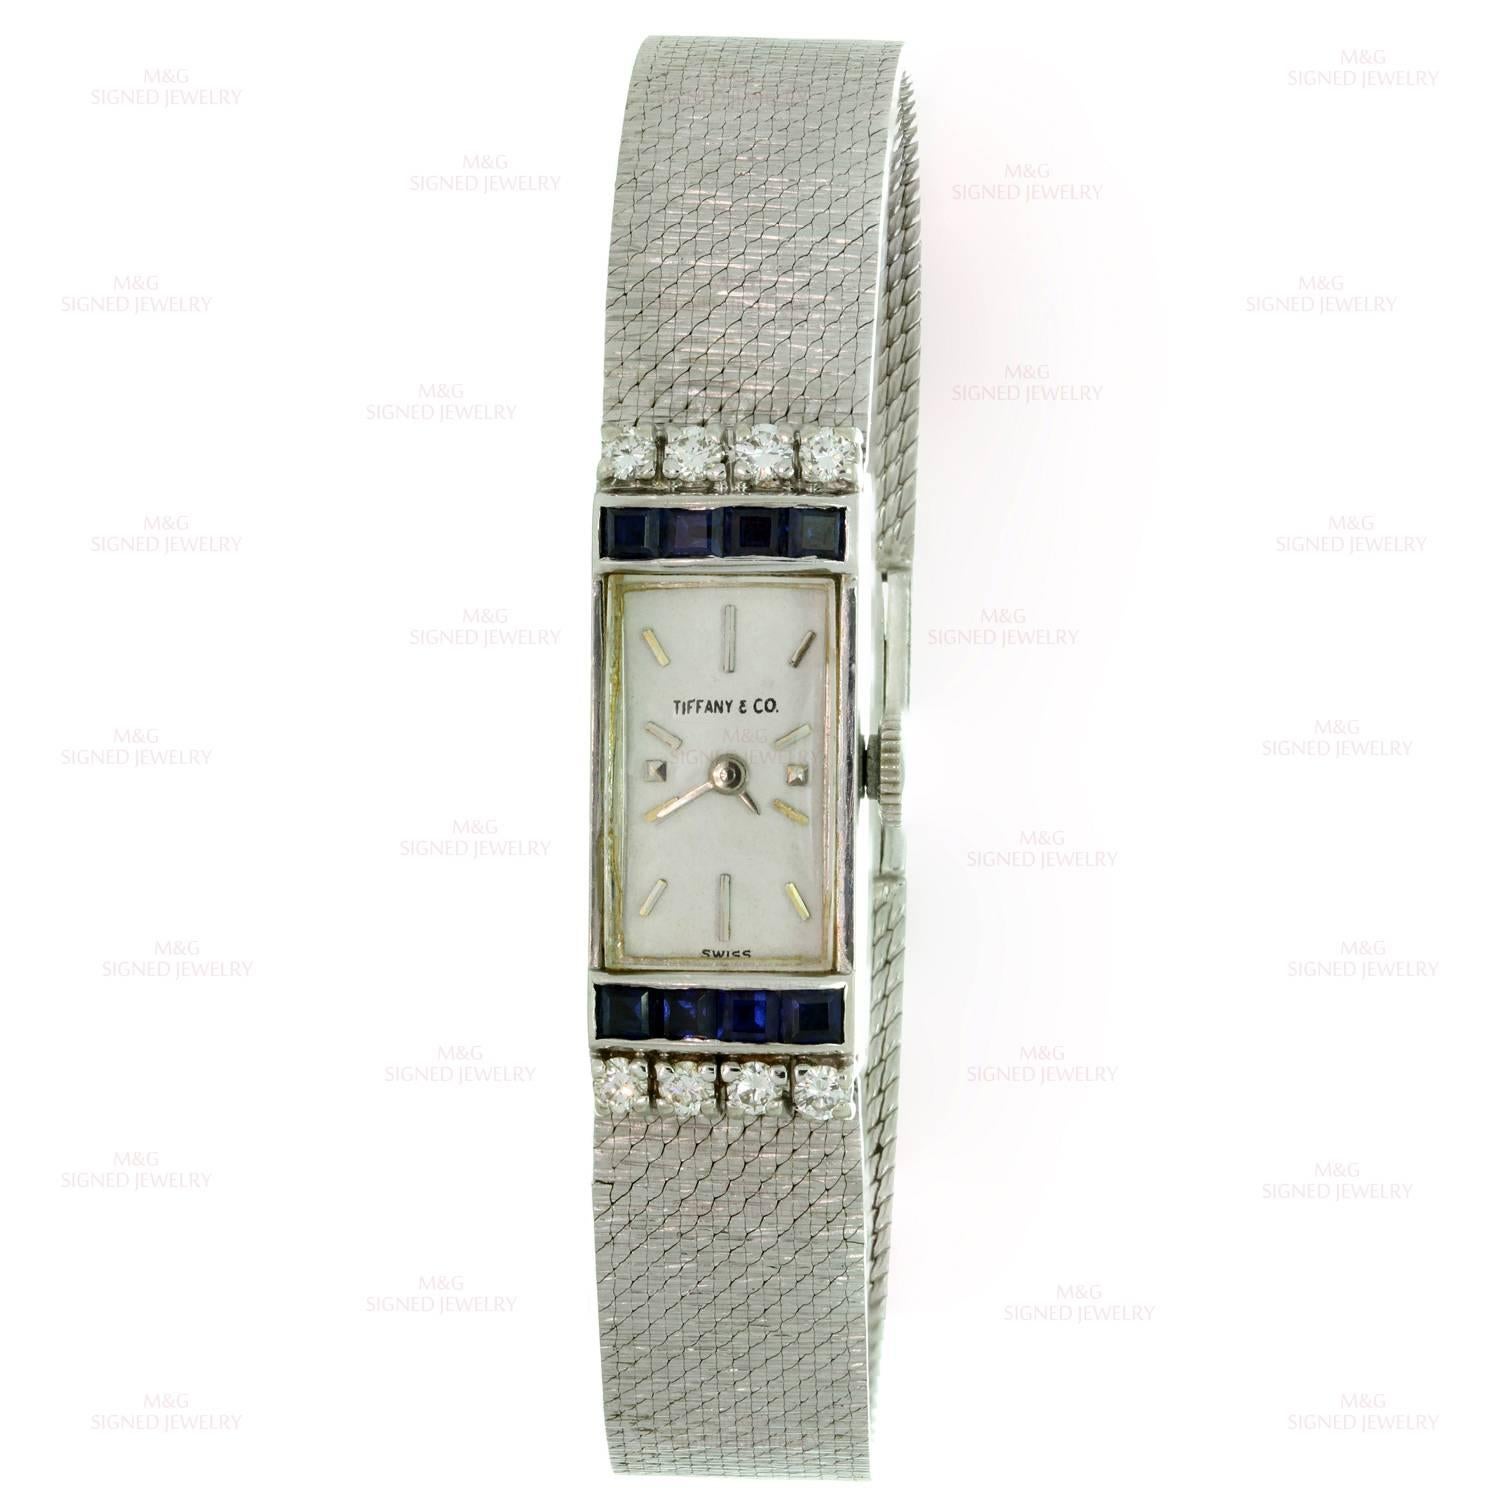 This stunning Tiffany vintage women's watch is crafted in 14k white gold and features a rectangular case accented with blue sapphires of an estimated 0.40 carats and brilliant-cut round diamonds of an estimated 0.32 carats. The mechanical hand wind